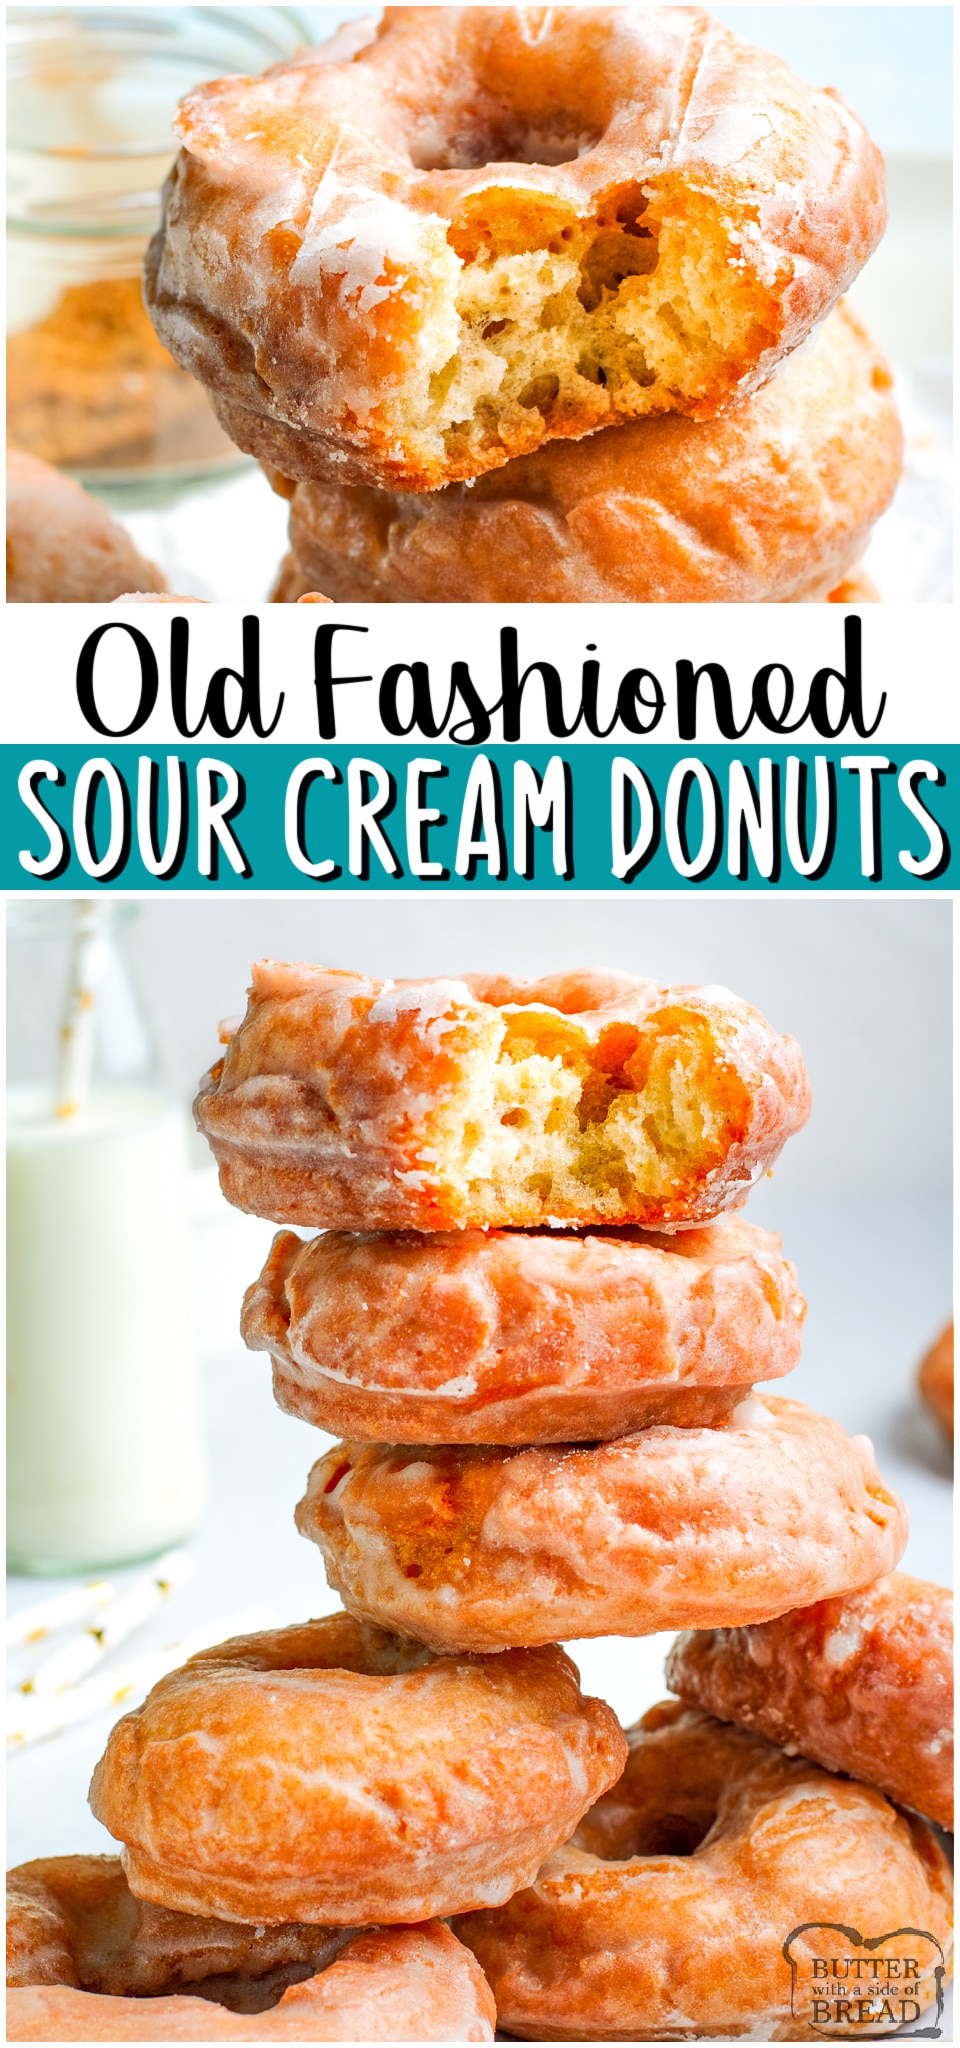 Old Fashioned Sour Cream Donuts made at home with simple ingredients! Easy donut recipe from scratch with no yeast & no rise time! Delicious, tender sour cream doughnuts with a vanilla glaze on top! #donuts #oldfashioned #sourcream #breakfast #dessert #homemade #easyrecipe from BUTTER WITH A SIDE OF BREAD